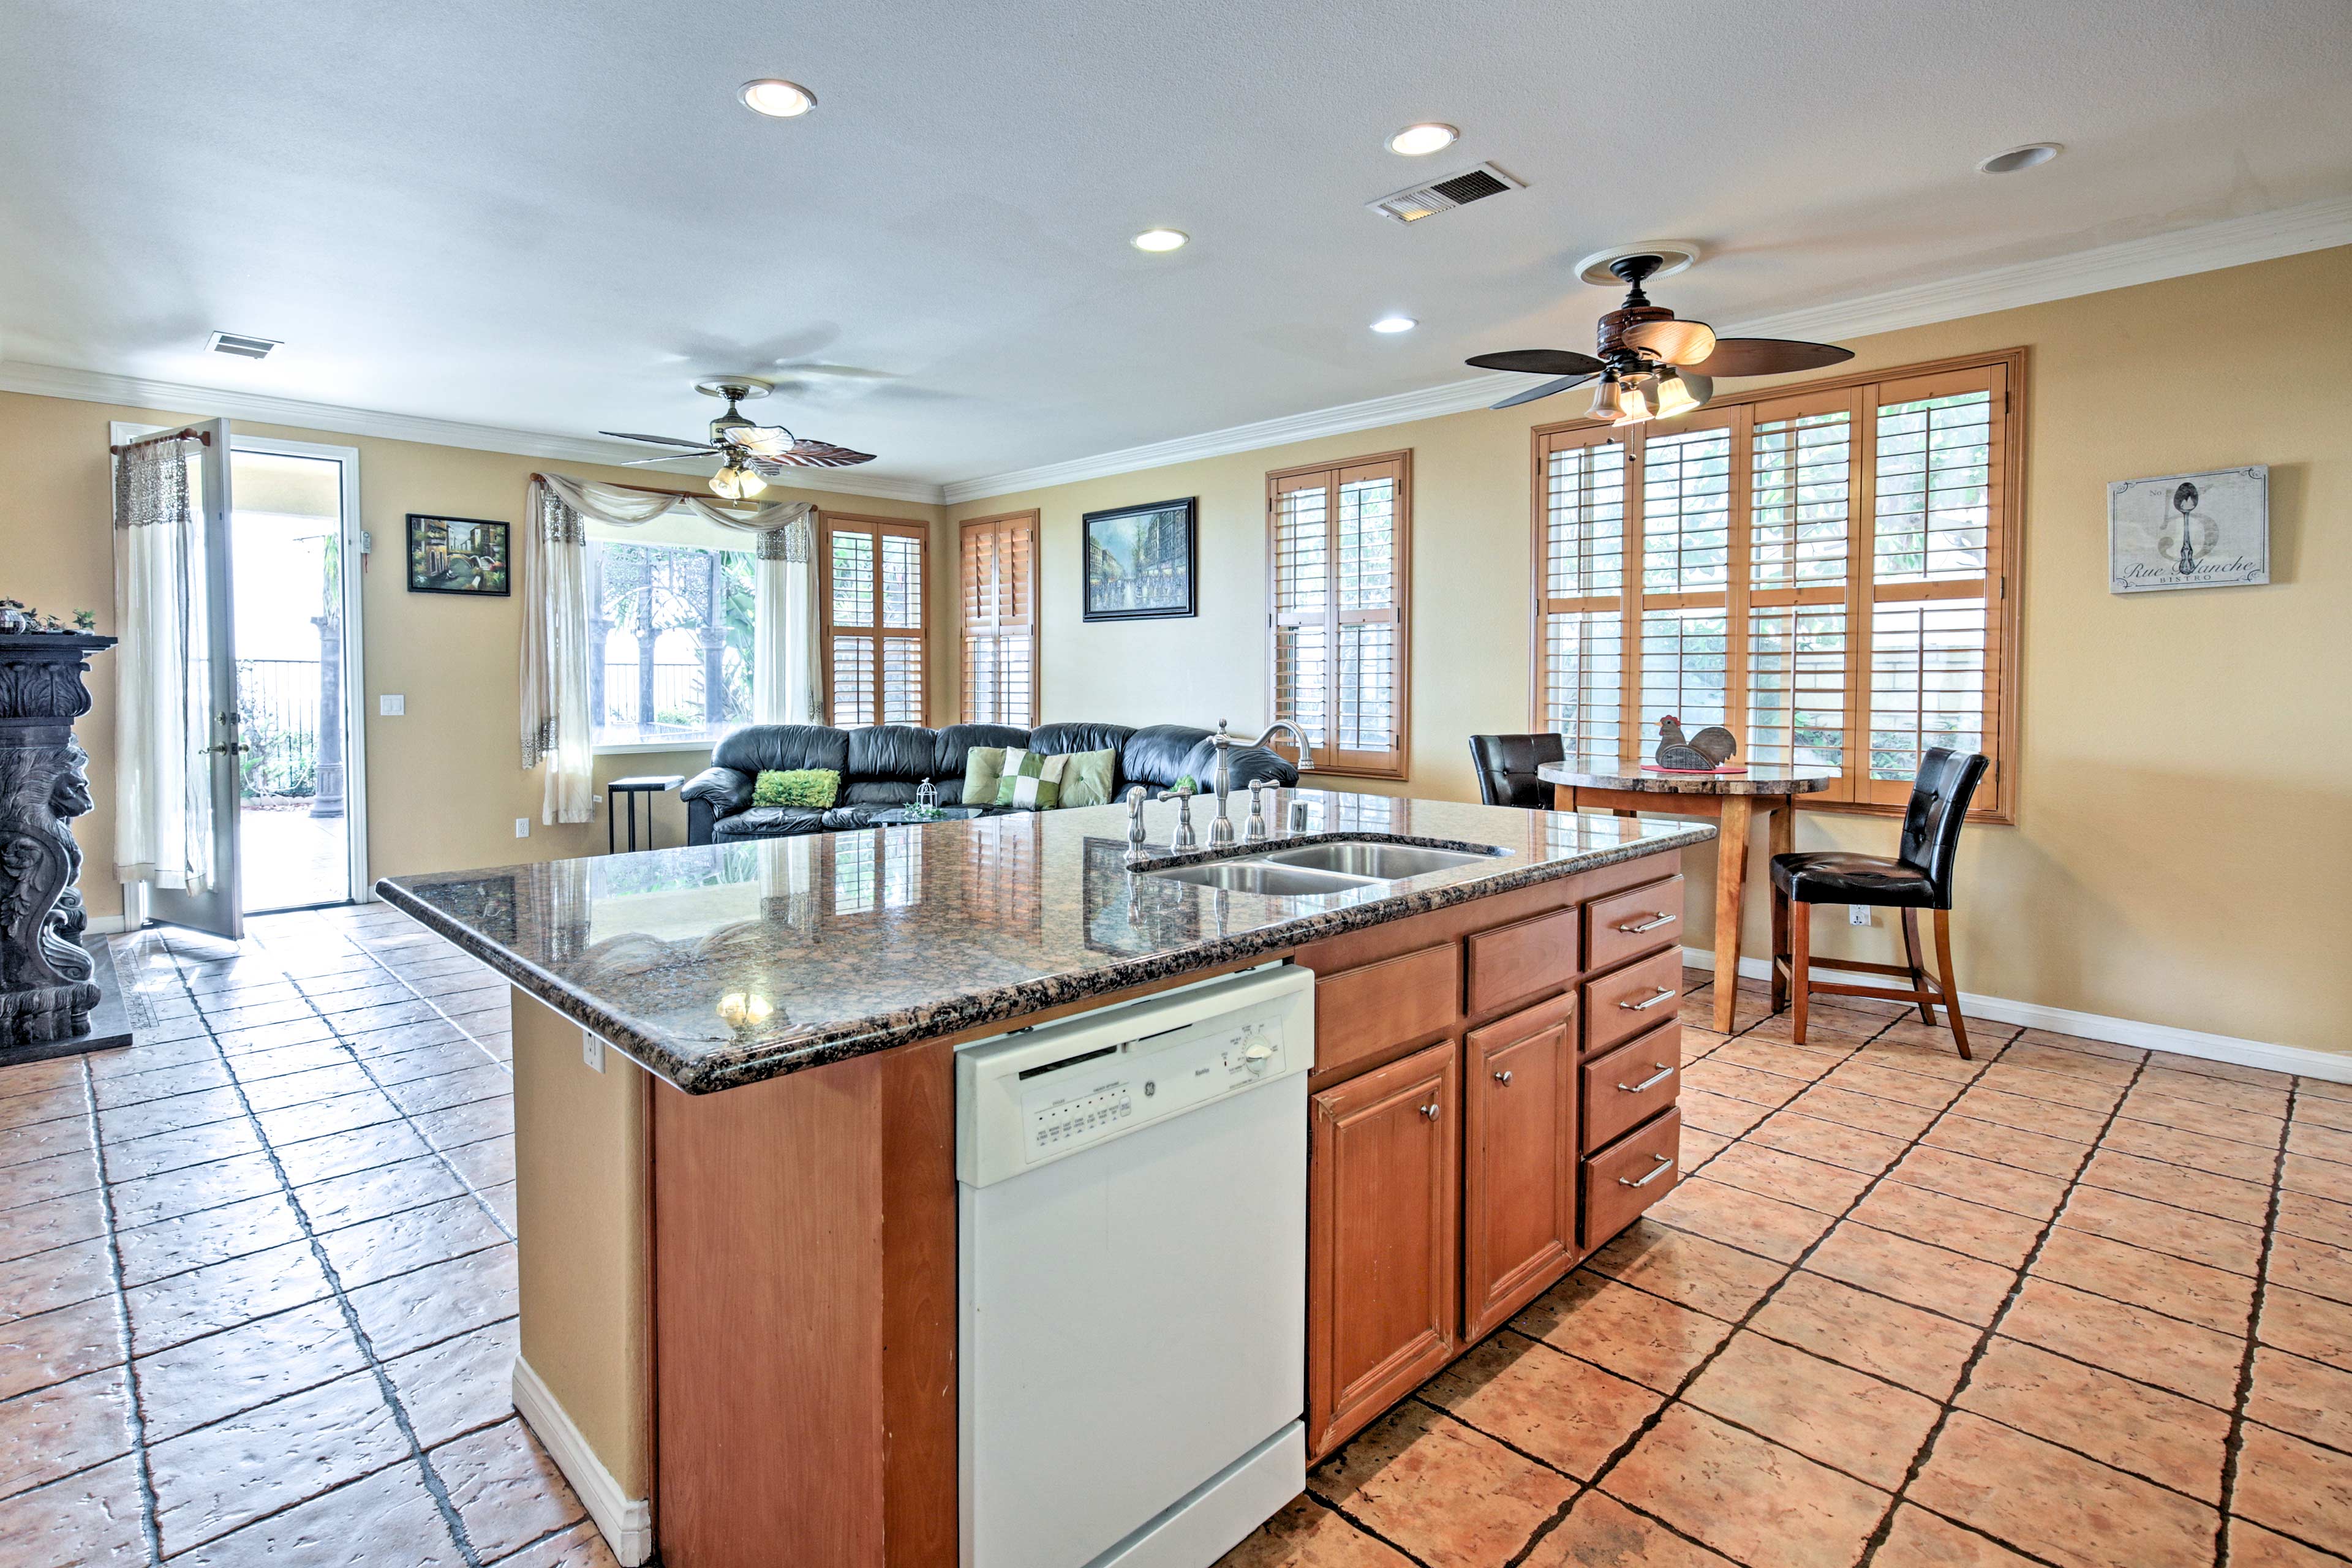 Open to the living room, the kitchen is great for entertaining.